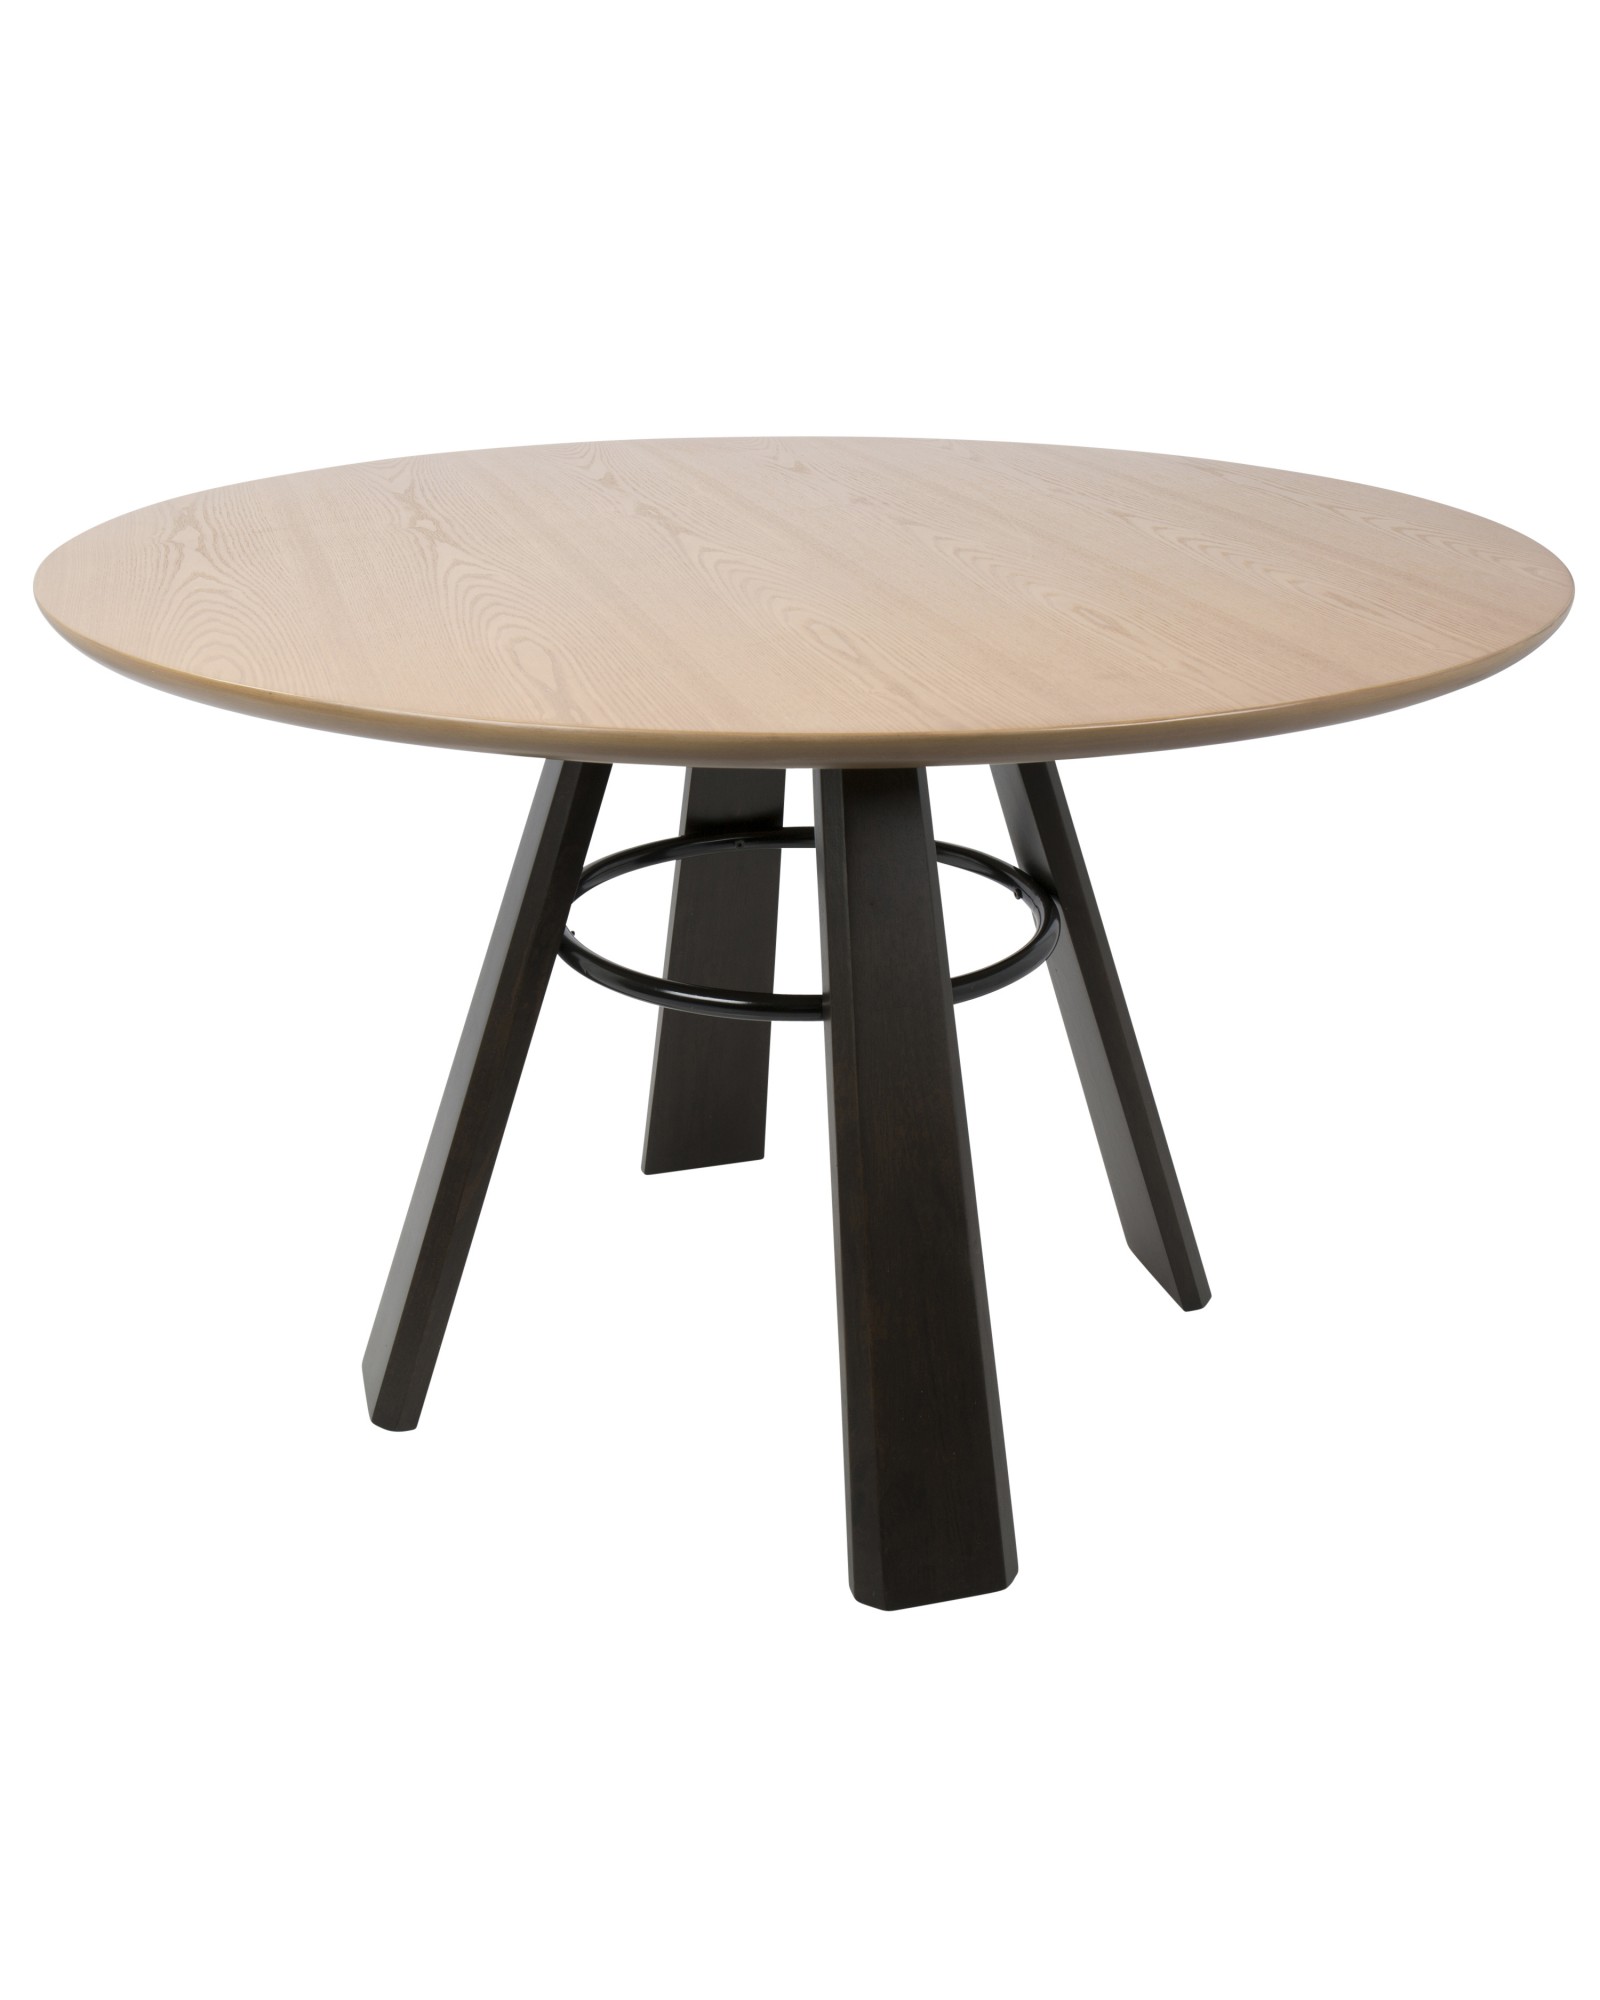 Elton Contemporary Dining Table in Oak Wood and Espresso